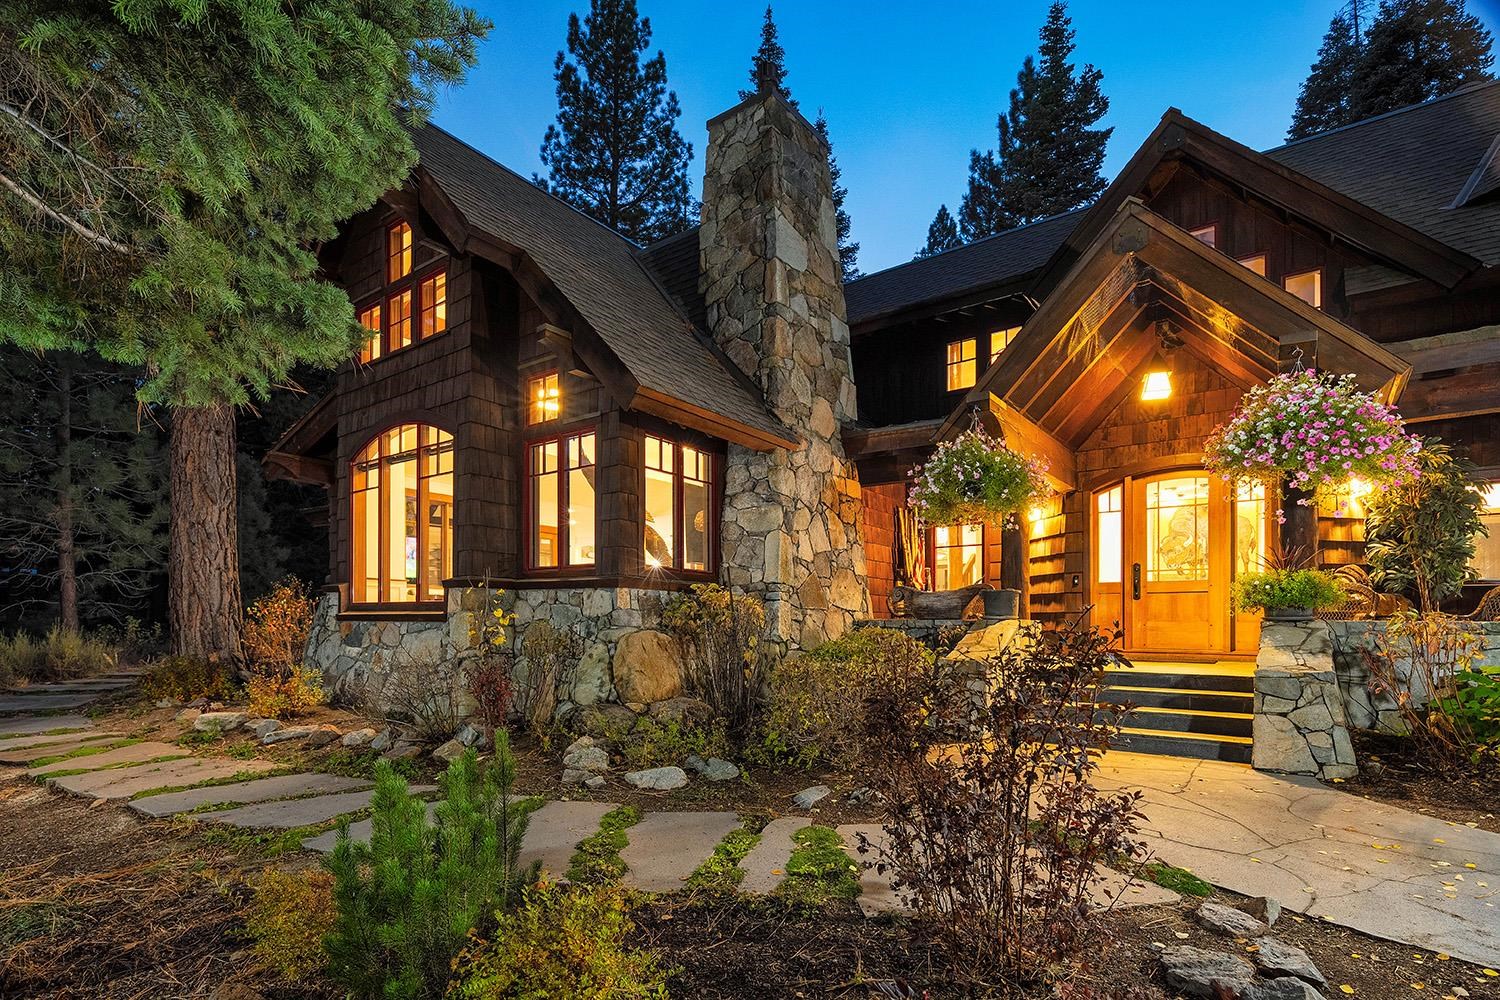 Image for 123 Dave Dysart, Truckee, CA 96161